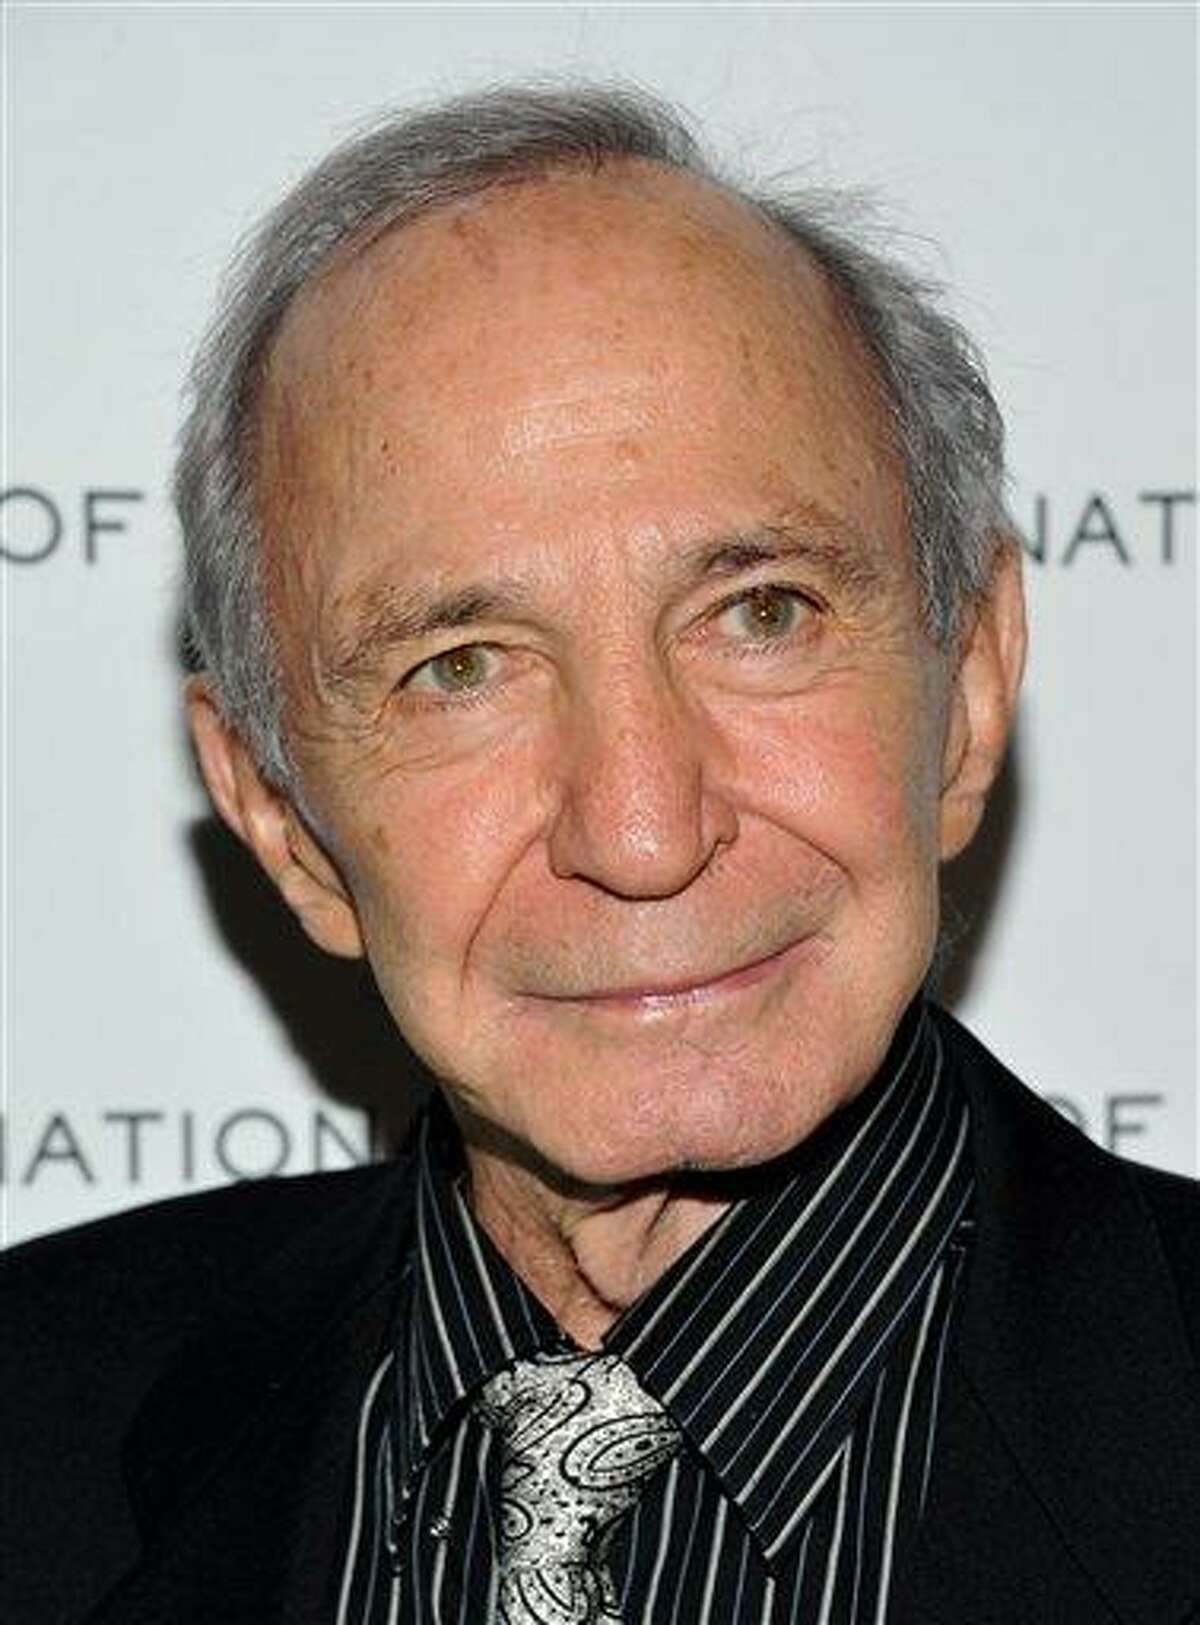 FILE - In this Jan. 11, 2011 file photo, actor Ben Gazzara attends The National Board of Review of Motion Pictures awards gala in New York. Gazzara, whose powerful dramatic performances brought an intensity to a variety of roles and made him a memorable presence in films, on television and on Broadway in the original "Cat on a Hot Tin Roof," has died at age 81. Longtime family friend Suzanne Mados said Gazzara died Friday, Feb. 3, 2012, in Manhattan after being in hospice care with cancer. (AP Photo/Evan Agostini, file)